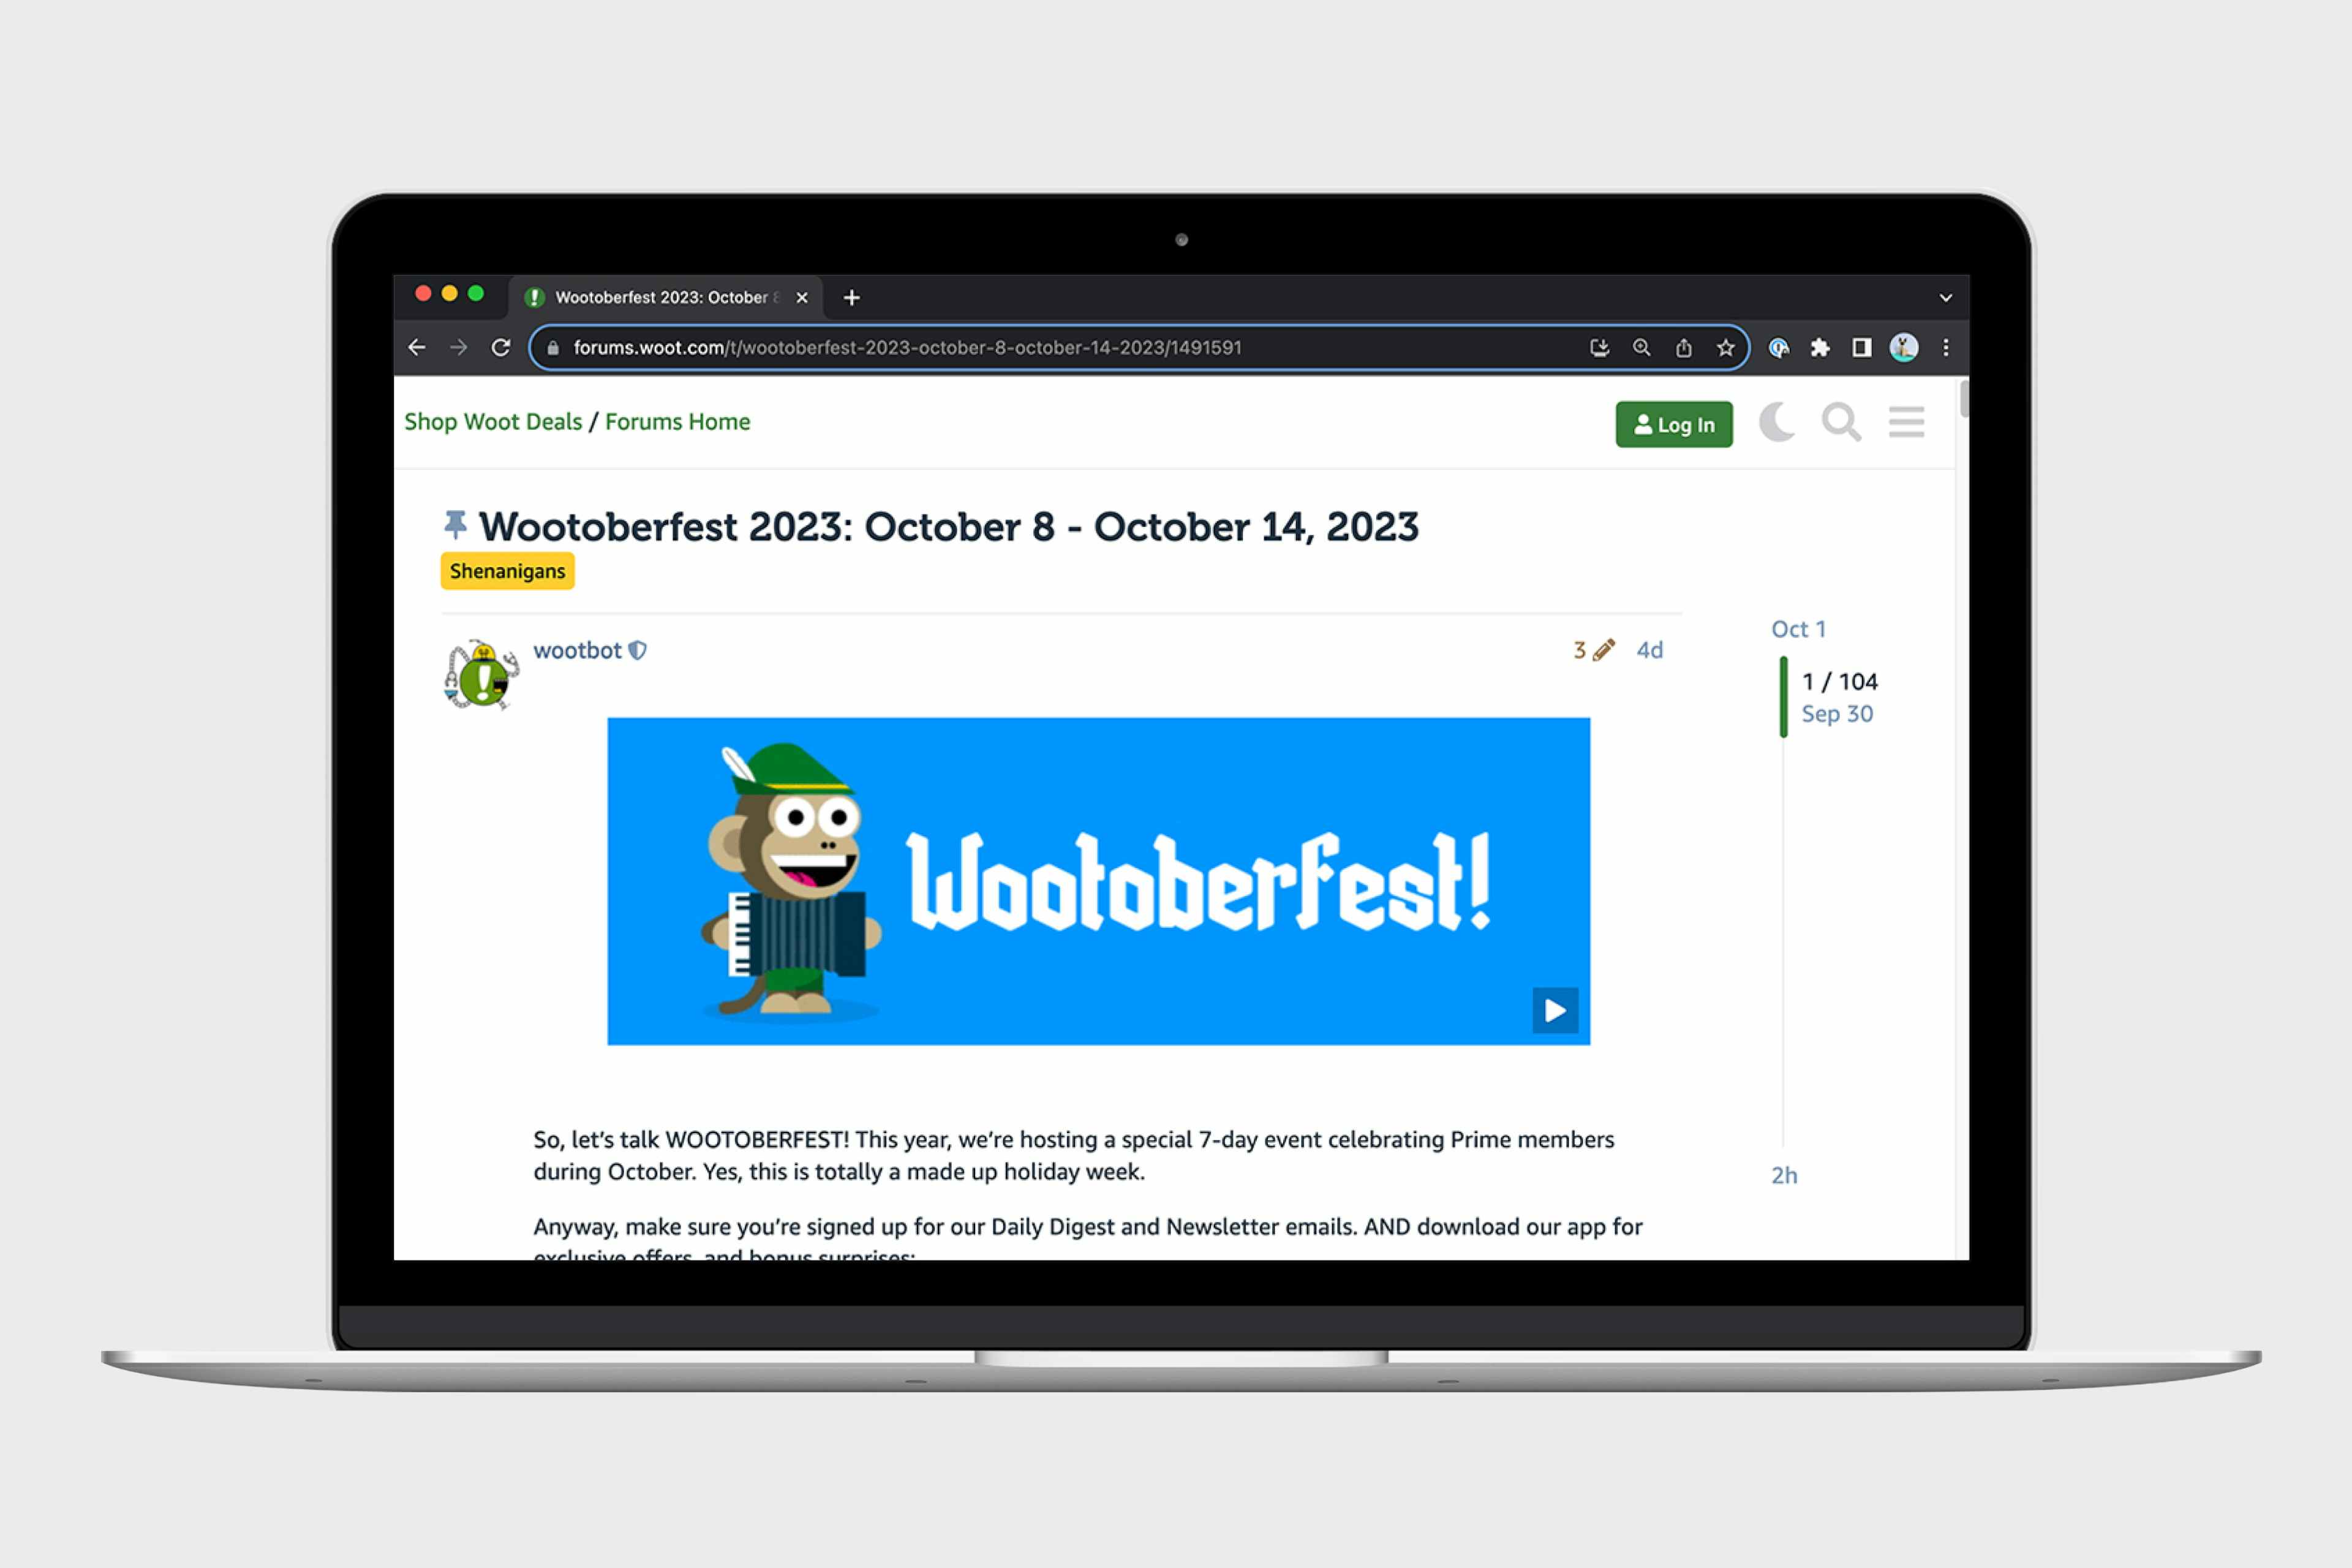 a laptop displaying a post on the Woot forum about Wootoberfest in October 2023